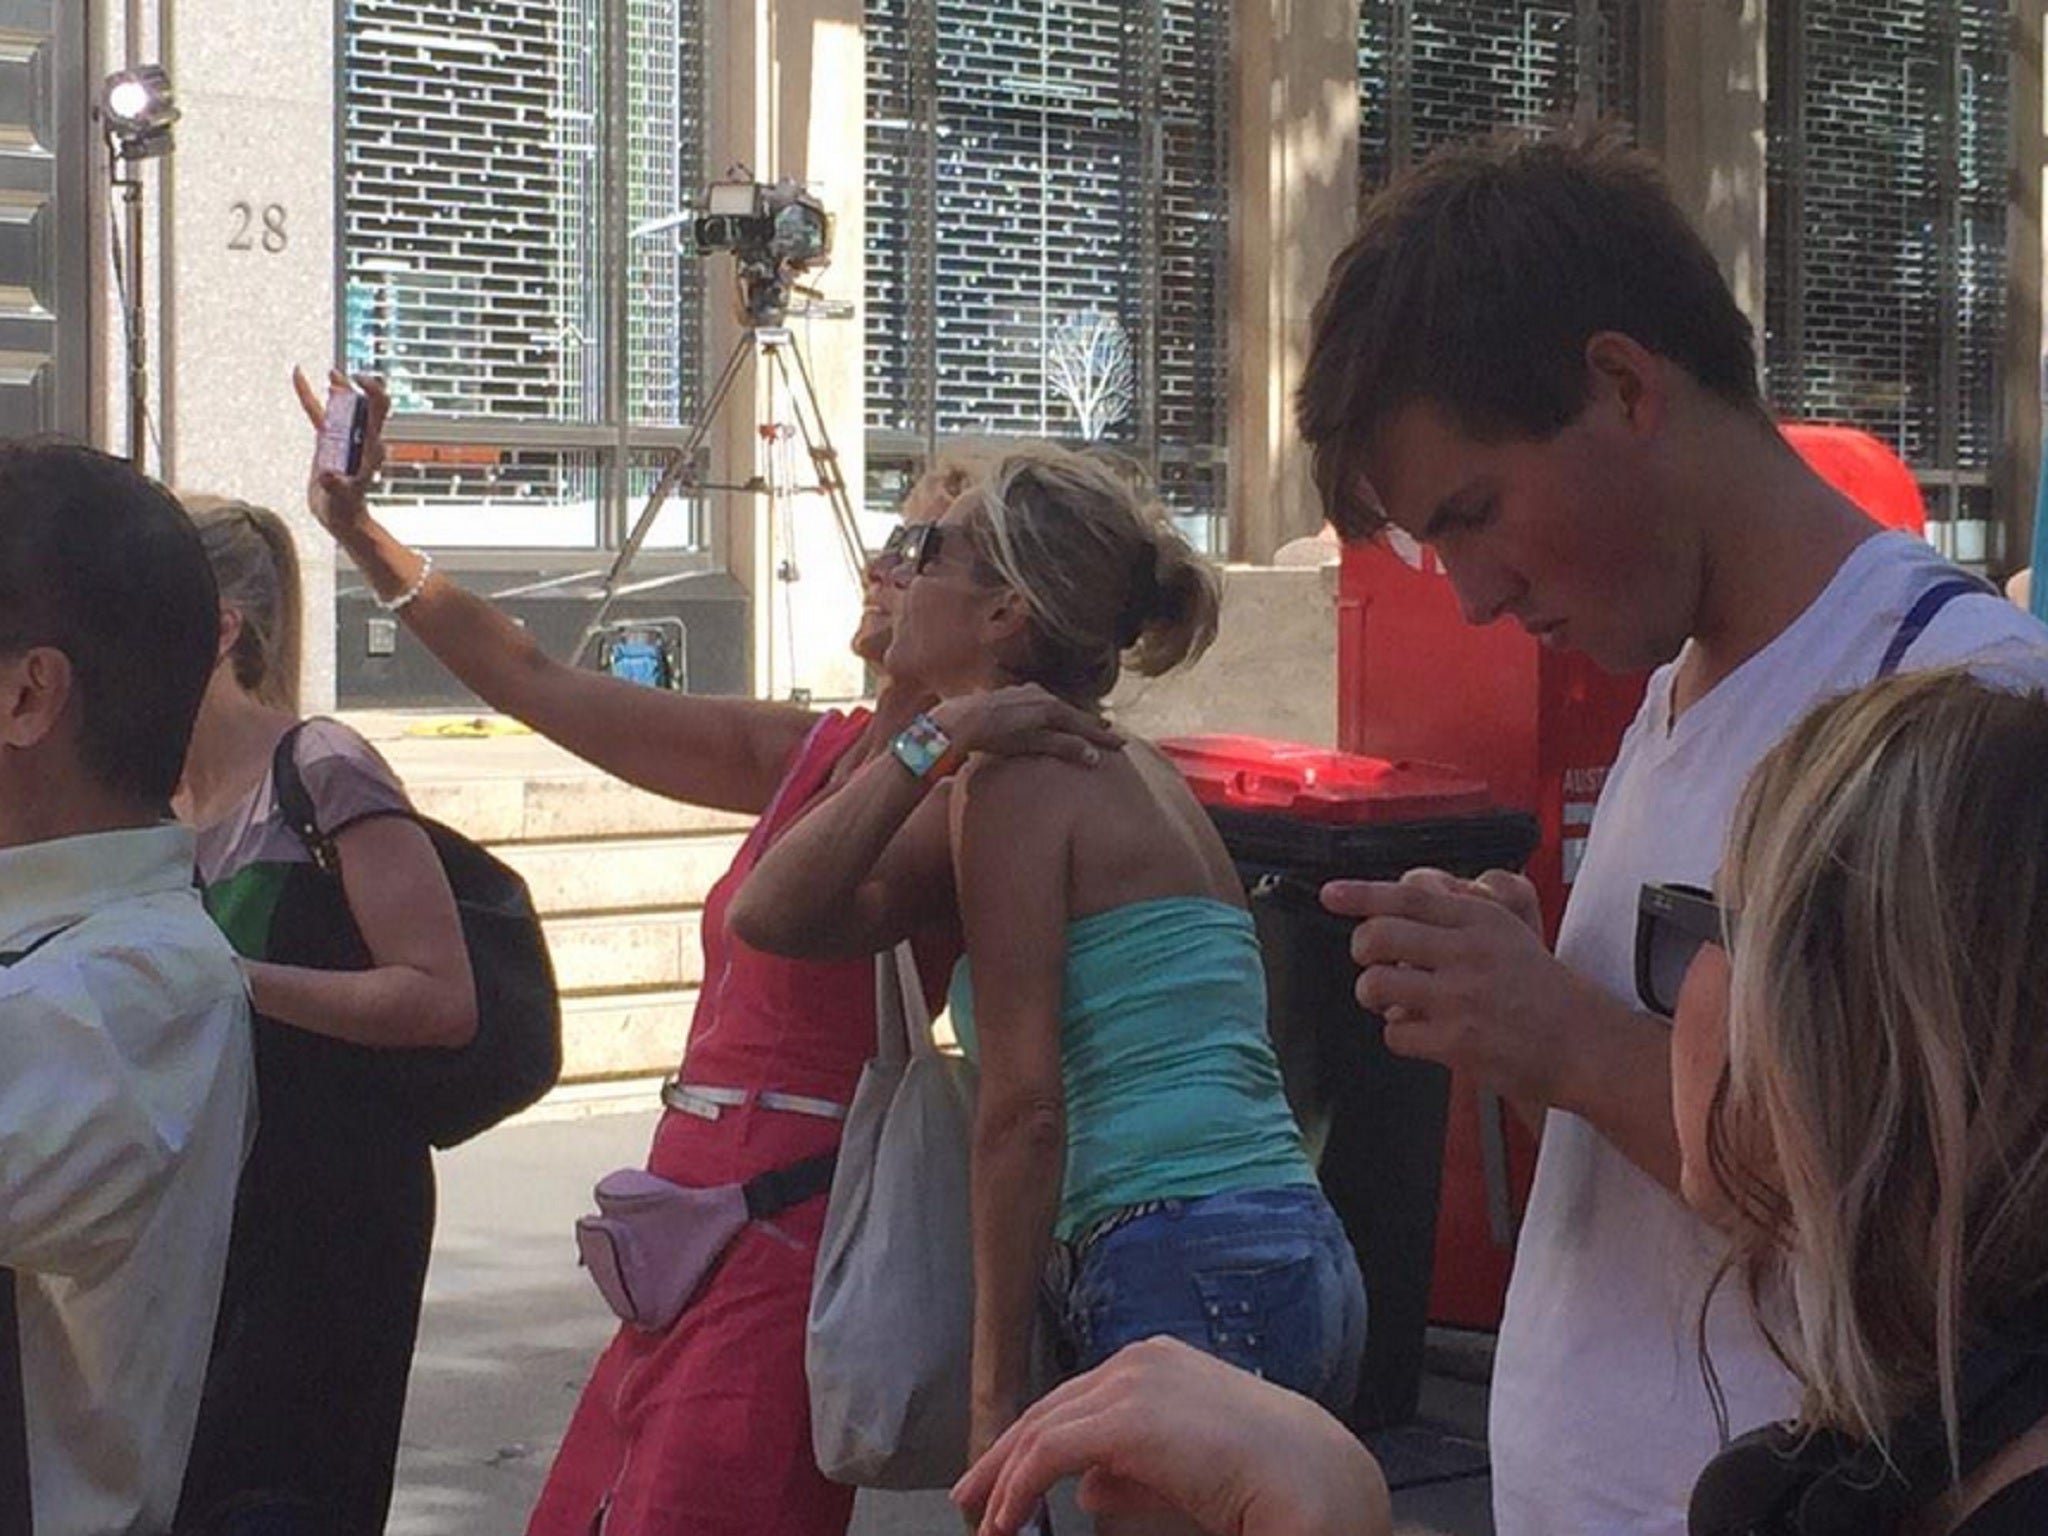 Two women take a selfie photo close to the café where around 15 people were taken hostage